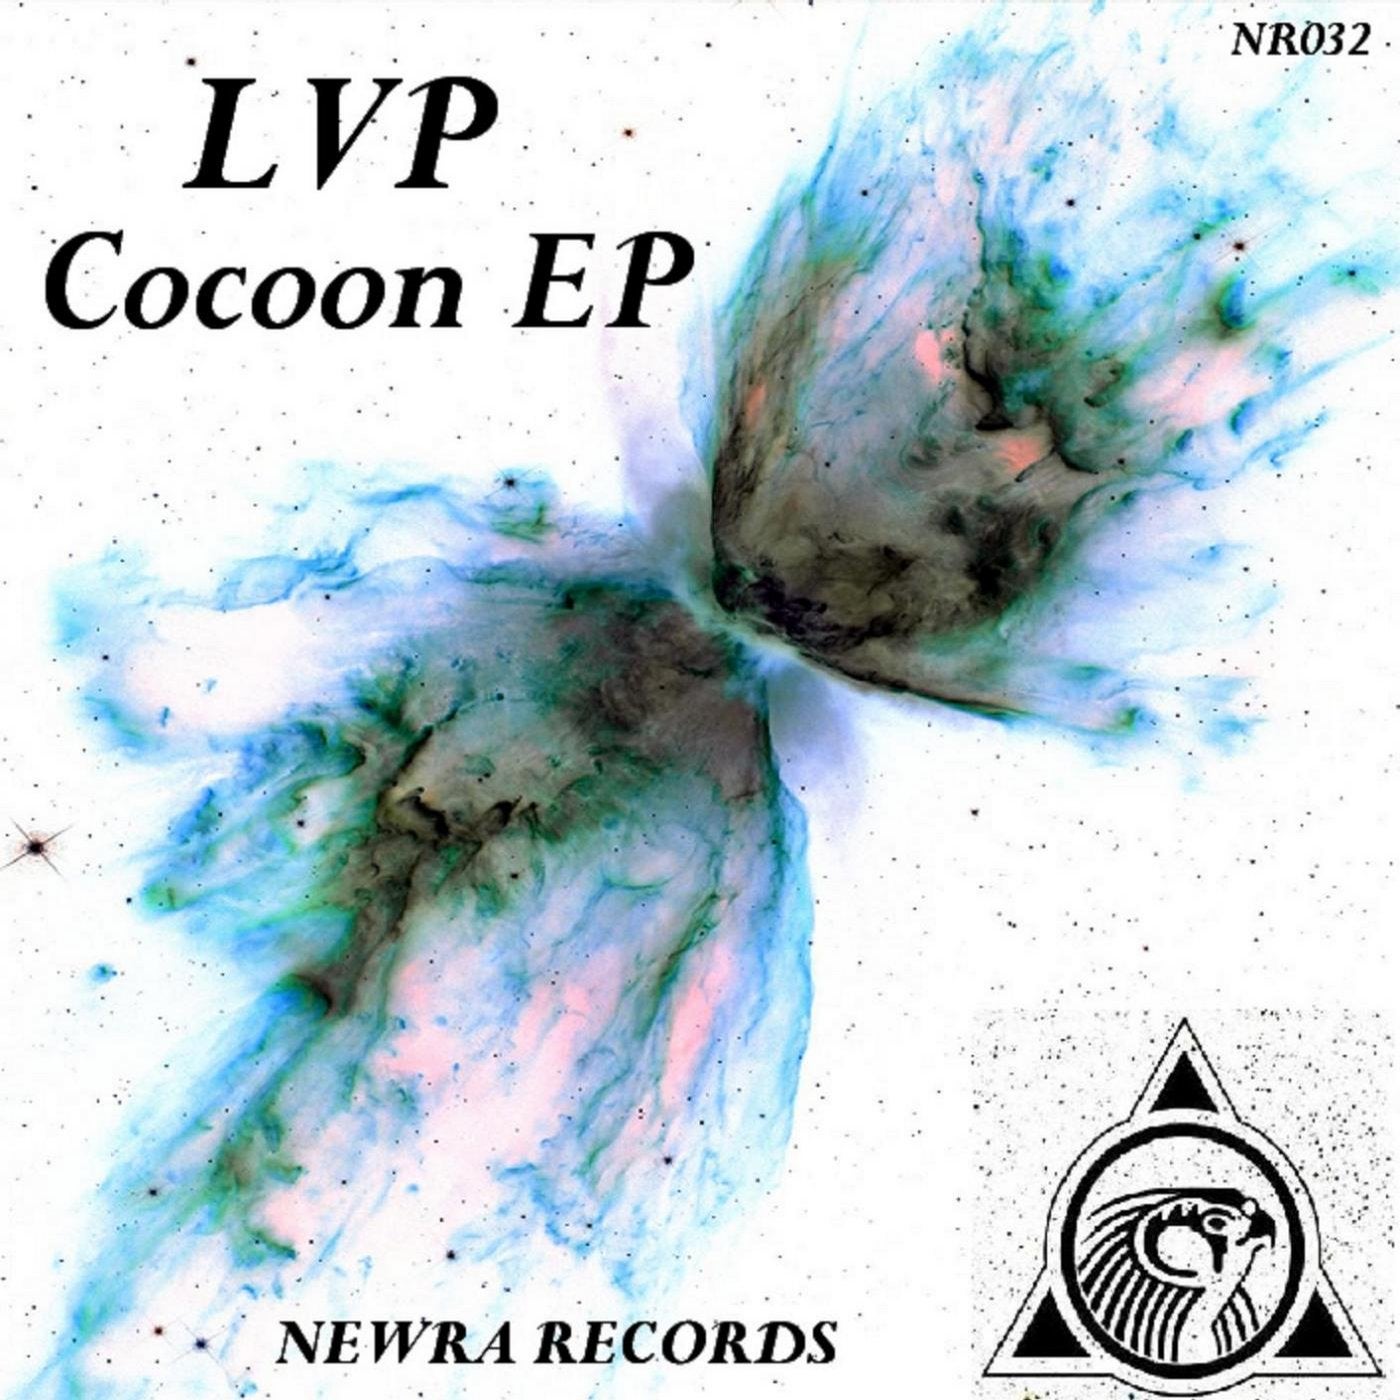 Cocoon EP